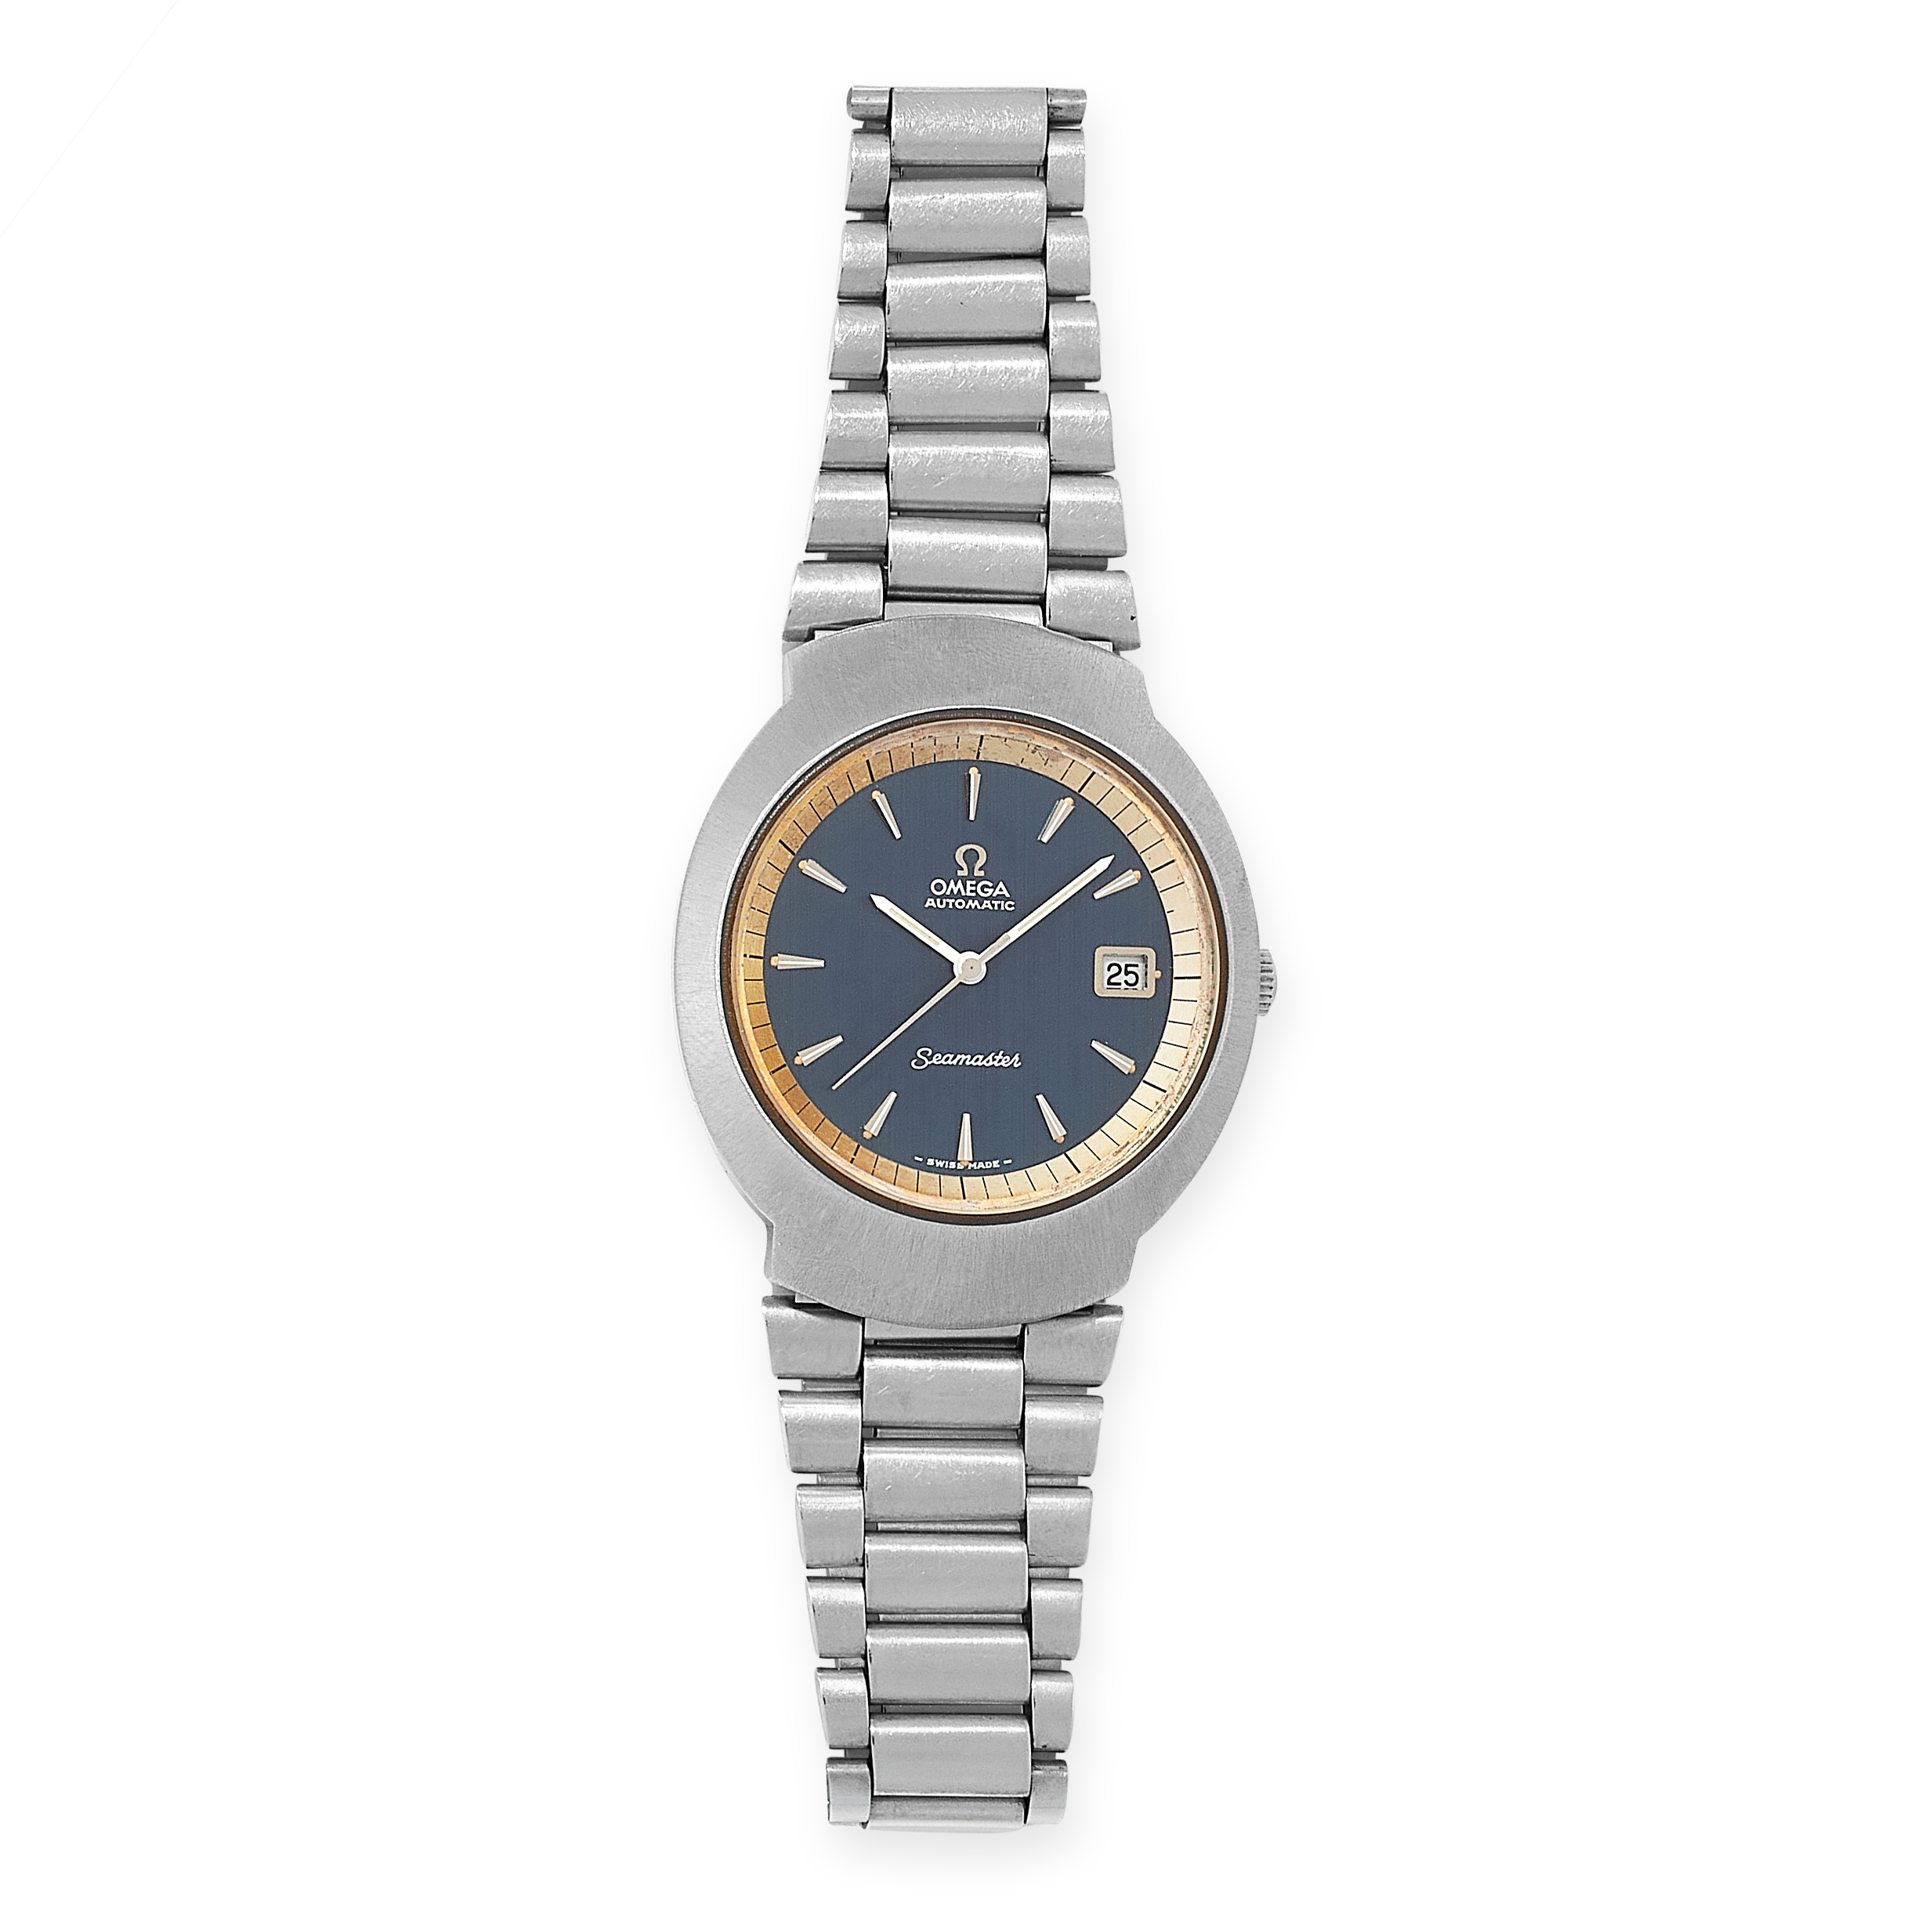 A OMEGA SEAMASTER WRIST WATCH, 1970 with blue dial and metal strap, 18.0cm, 101.7g.